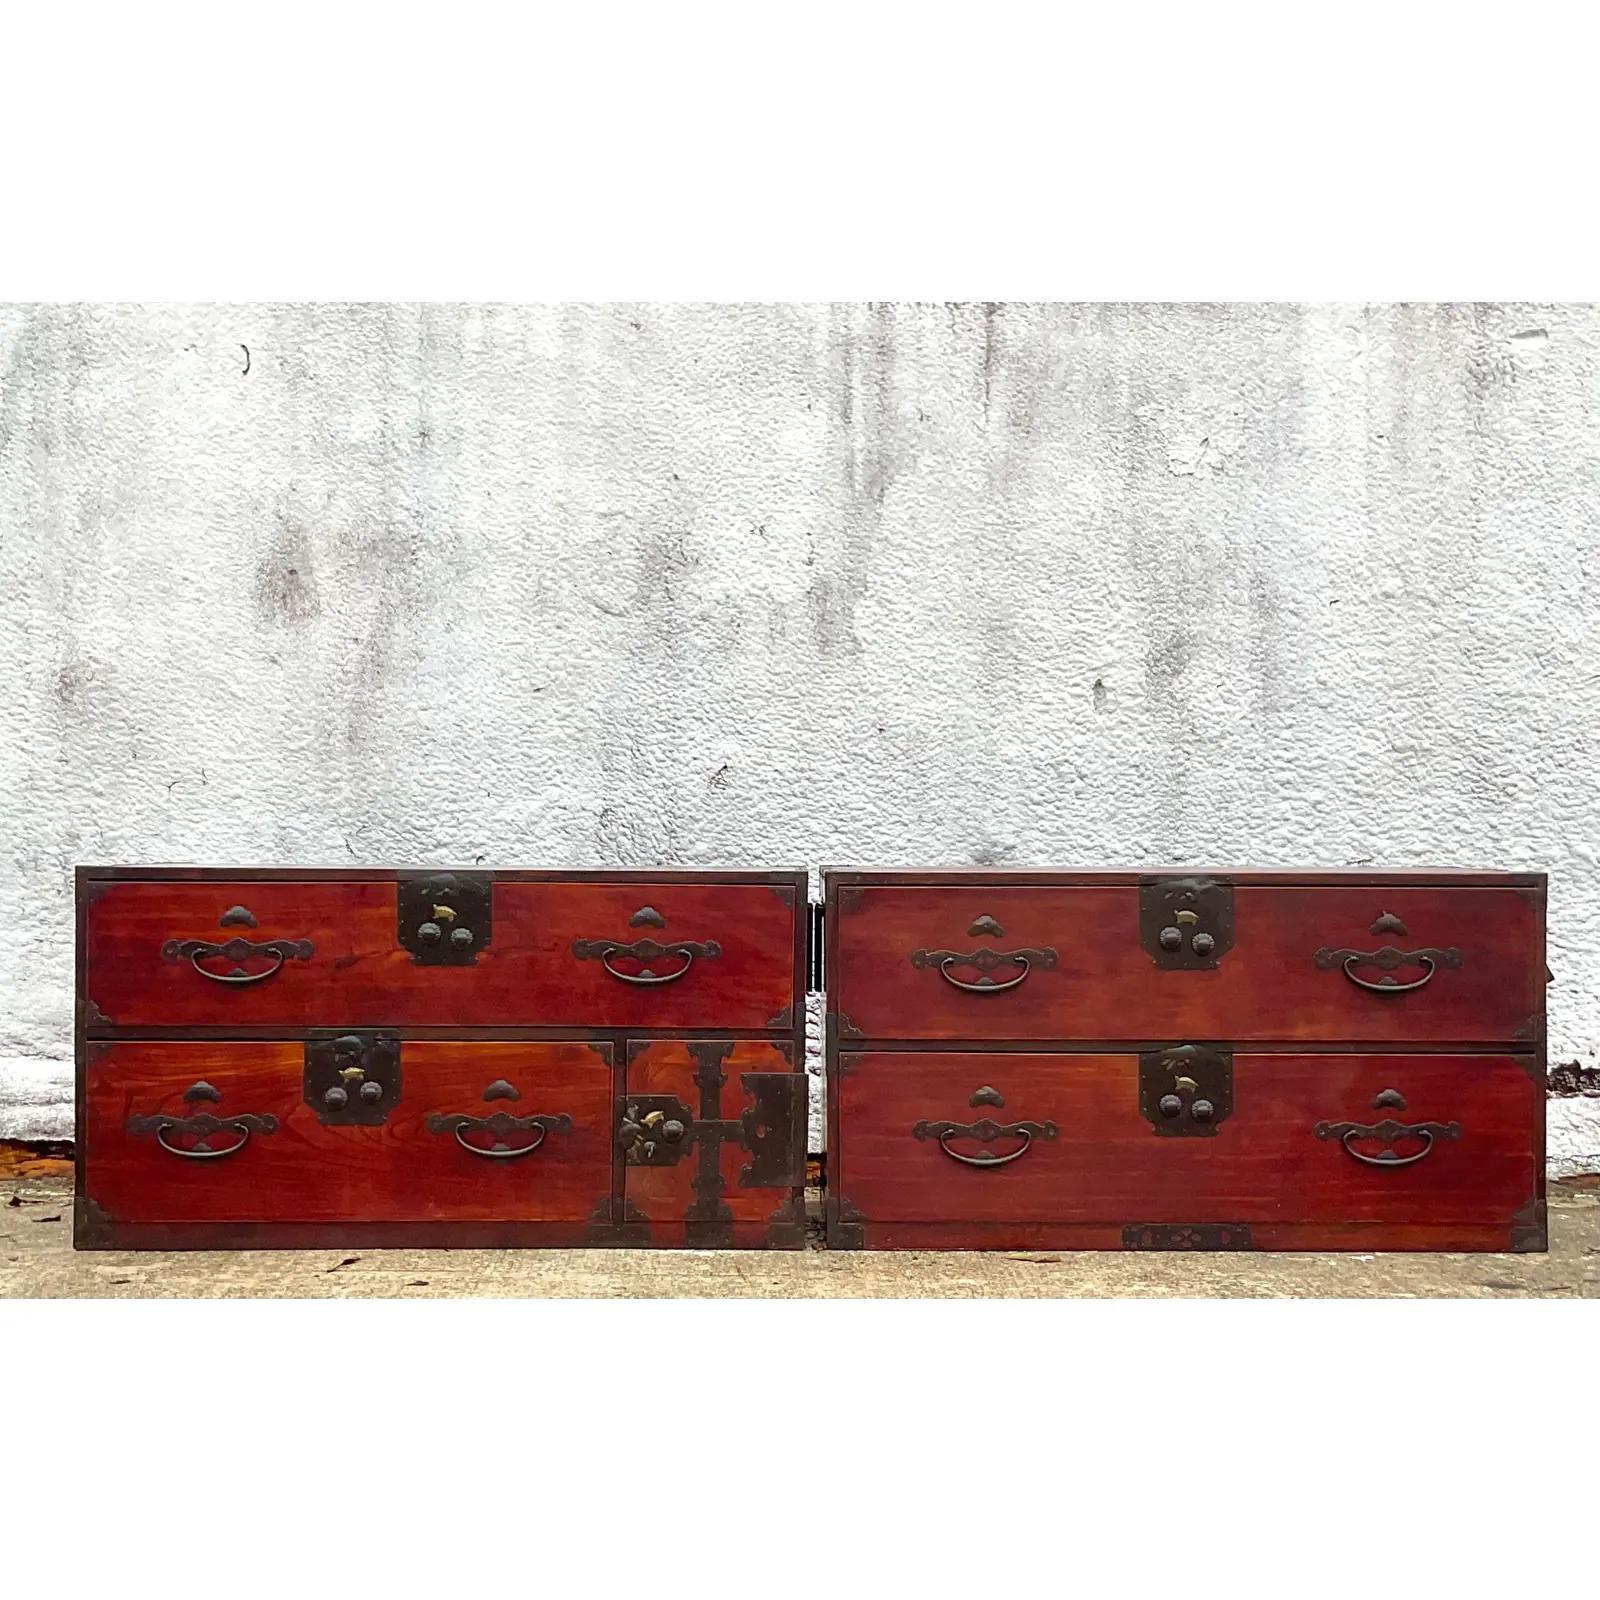 Southeast Asian Vintage 19th Century Asian Stacking Tansu Cabinets